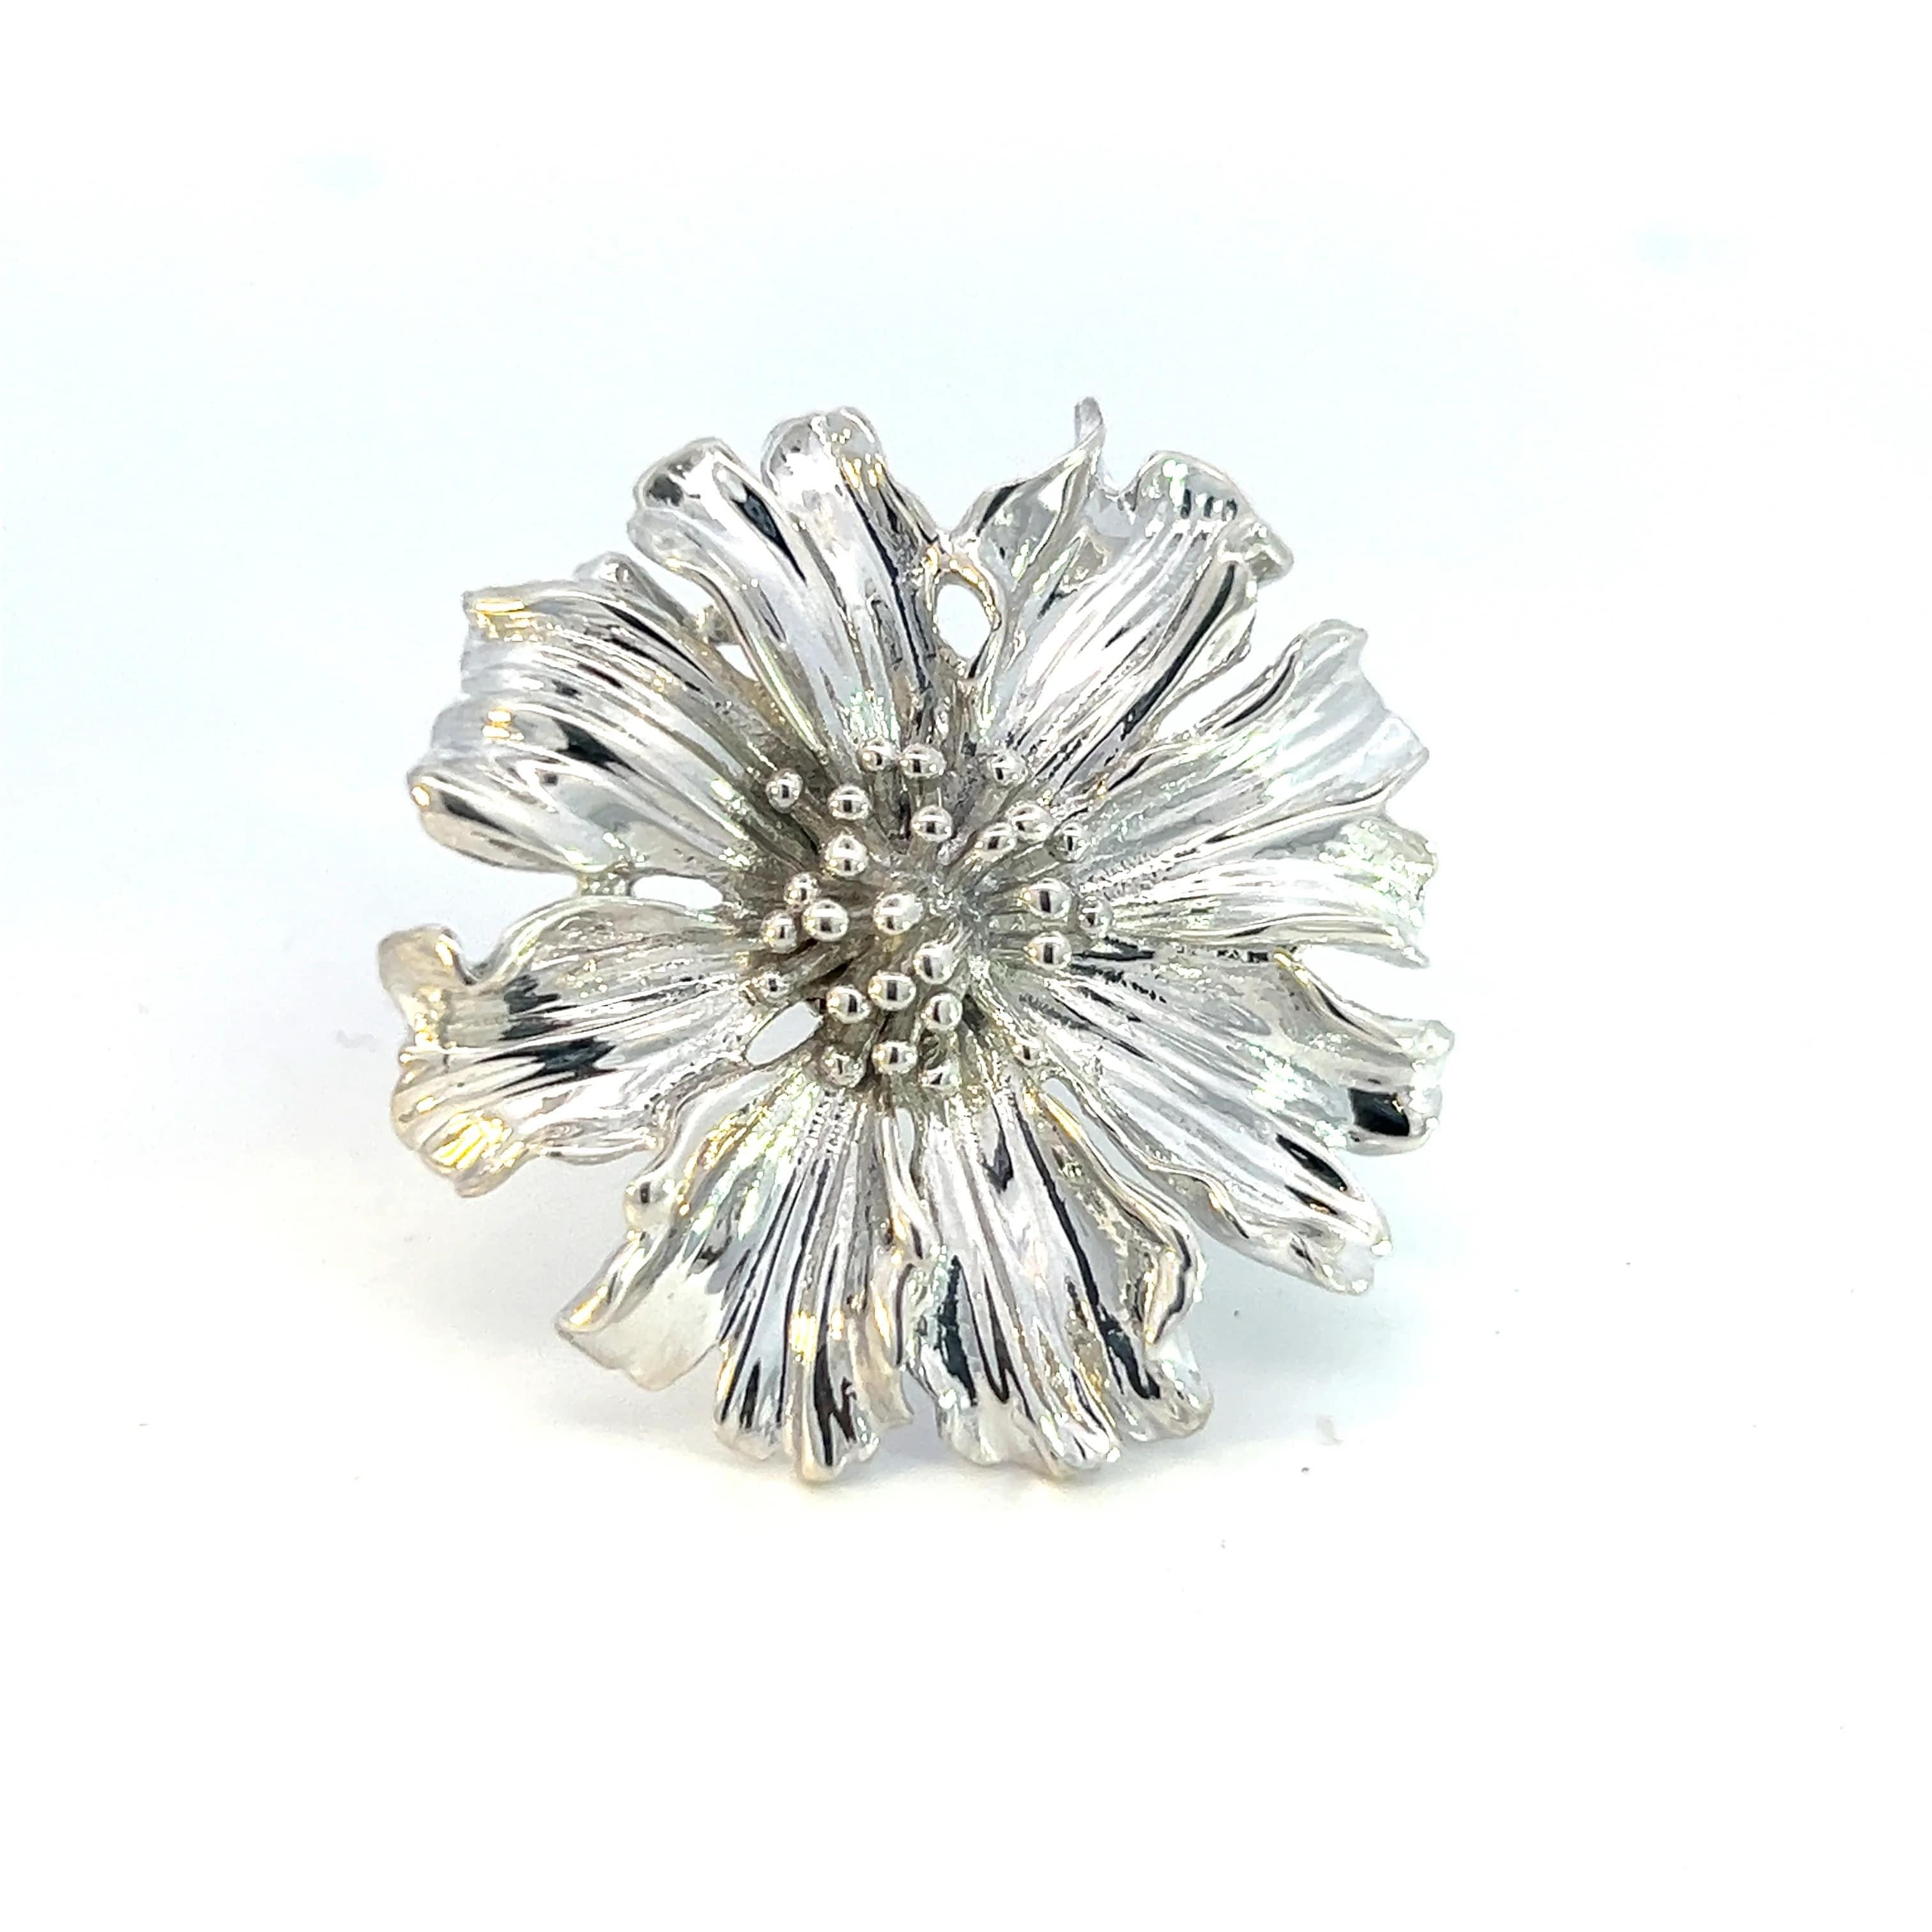 Tiffany & Co Estate Marigold Flower Brooch Pin Sterling Silver TIF575

This elegant Authentic Tiffany & Co Silver brooch has a weight of 11.50 Grams.

TRUSTED SELLER SINCE 2002

PLEASE SEE OUR HUNDREDS OF POSITIVE FEEDBACKS FROM OUR CLIENTS!!

FREE